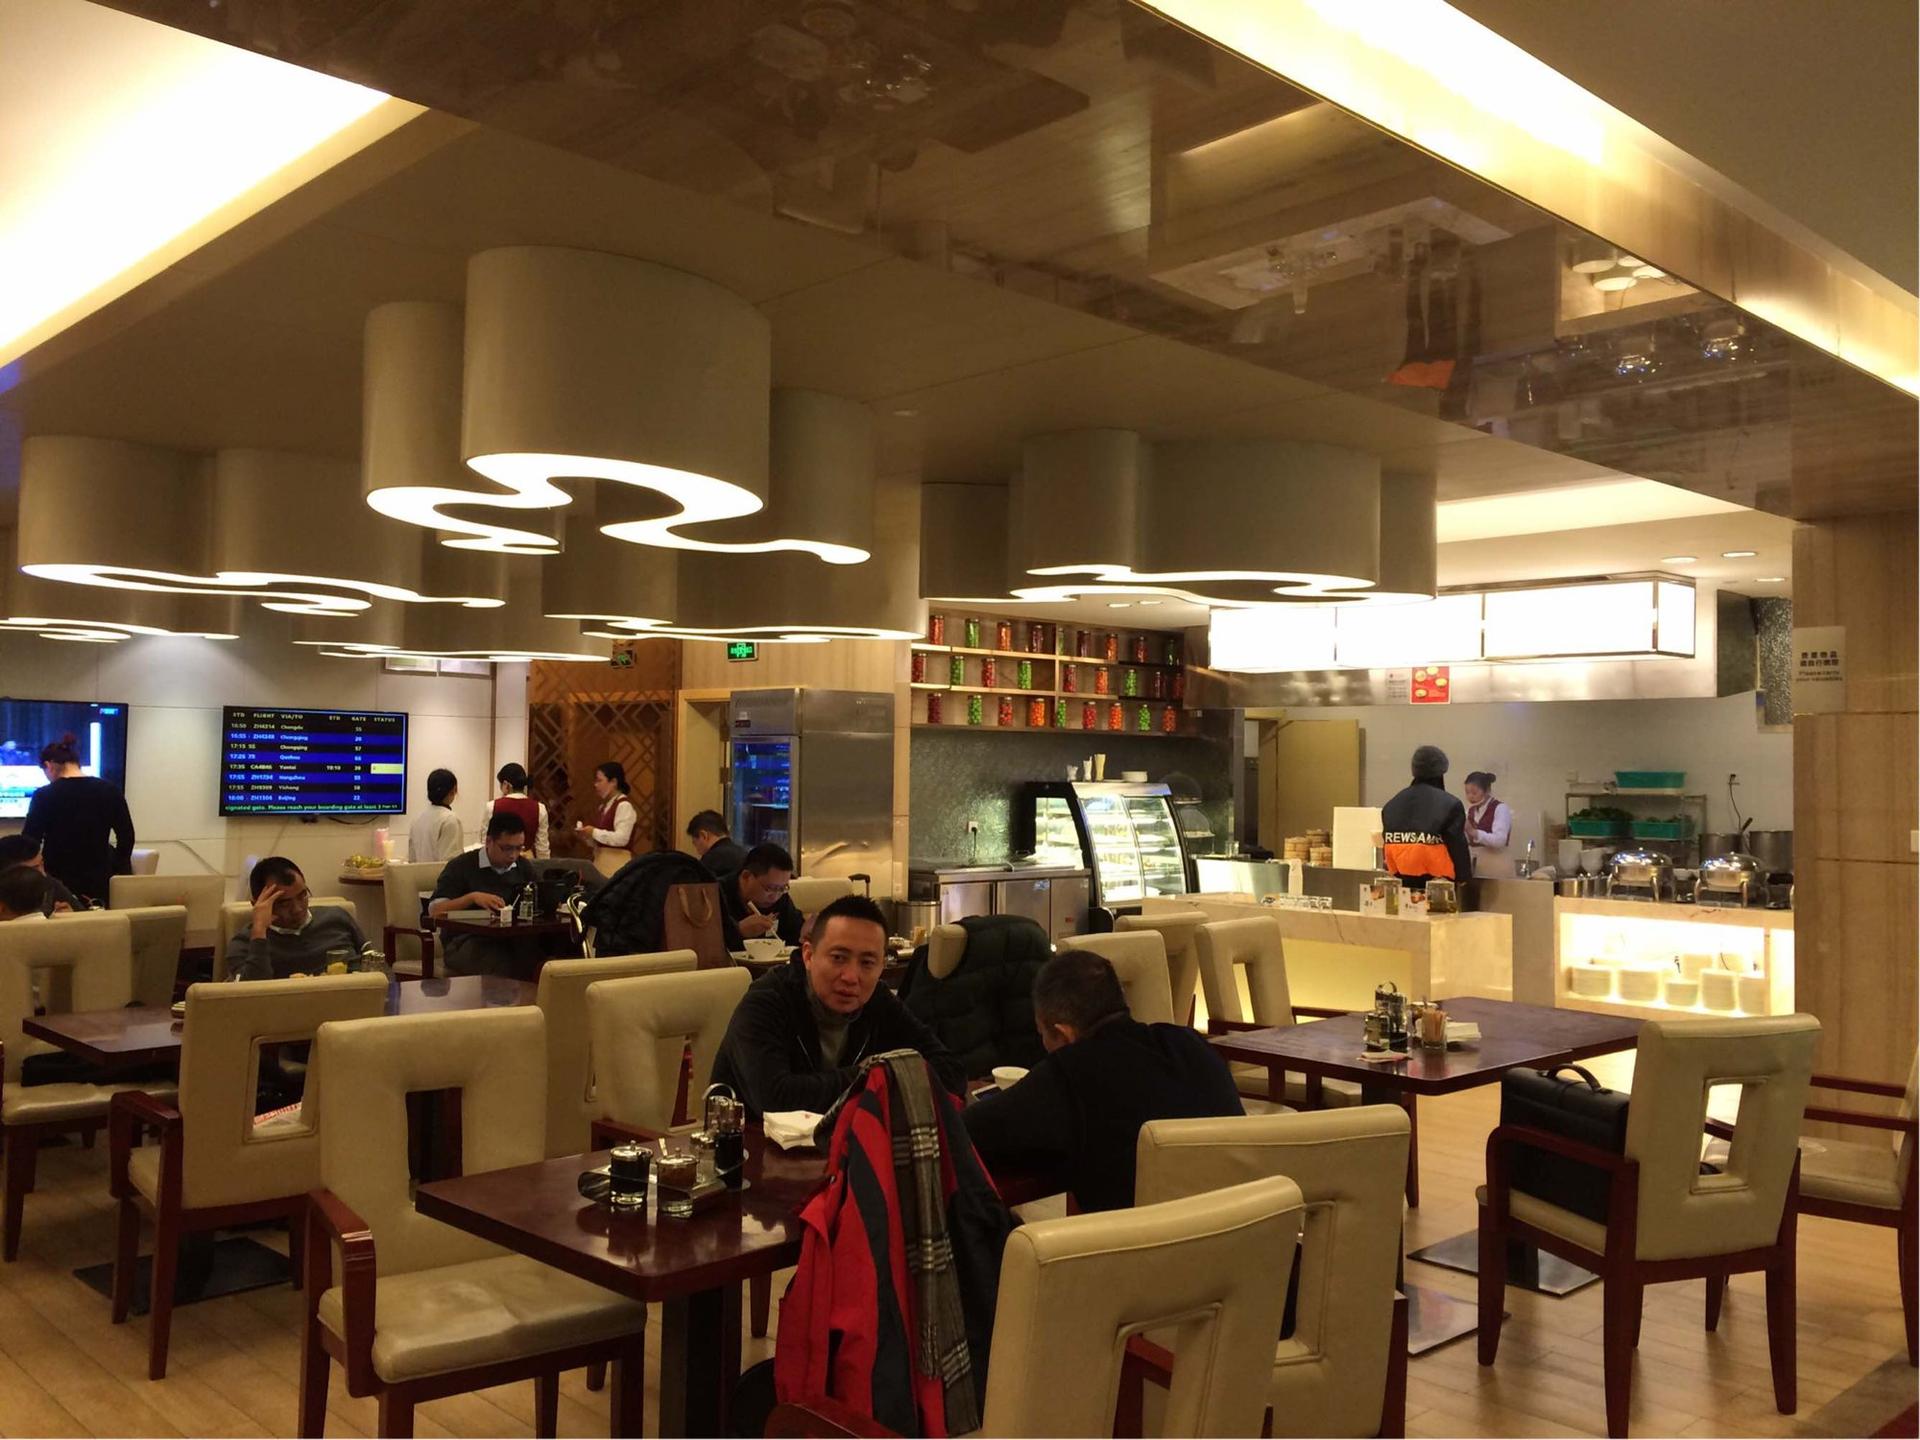 Shenzhen Airlines King Lounge Hall 2 image 7 of 7